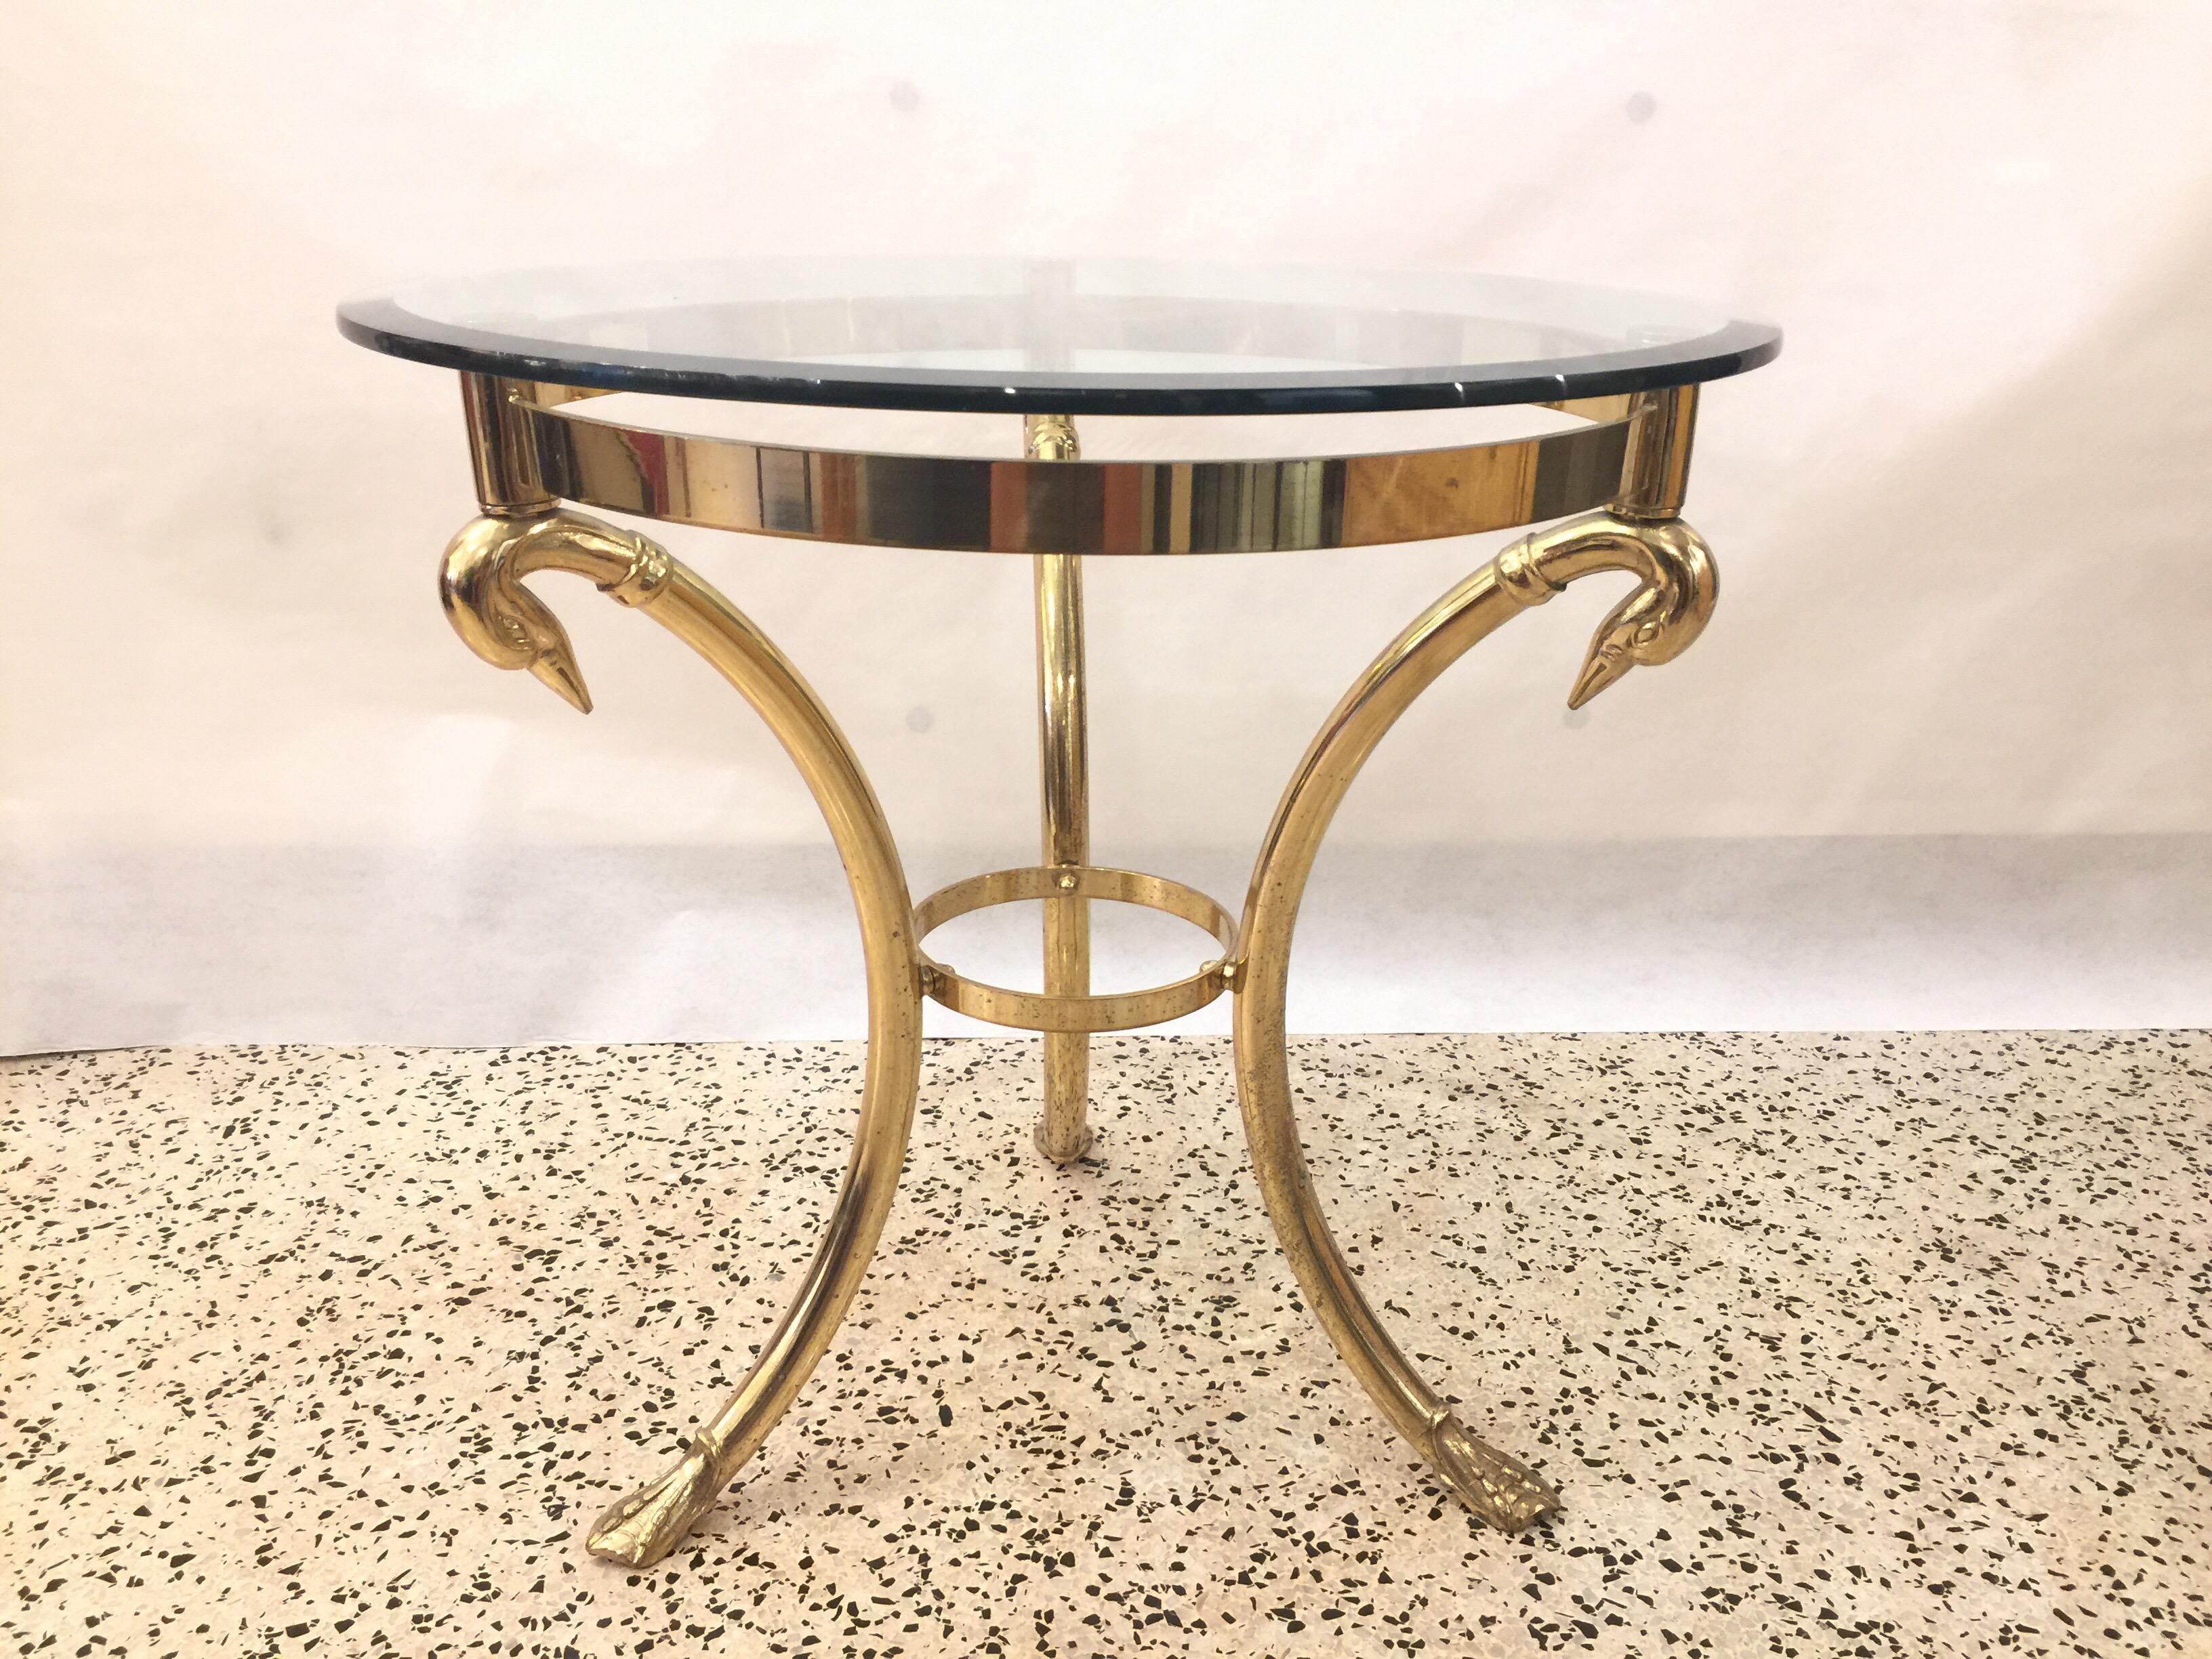 Three-legged Italian brass table with draped swan head supports and swan feet- Beveled glass top.